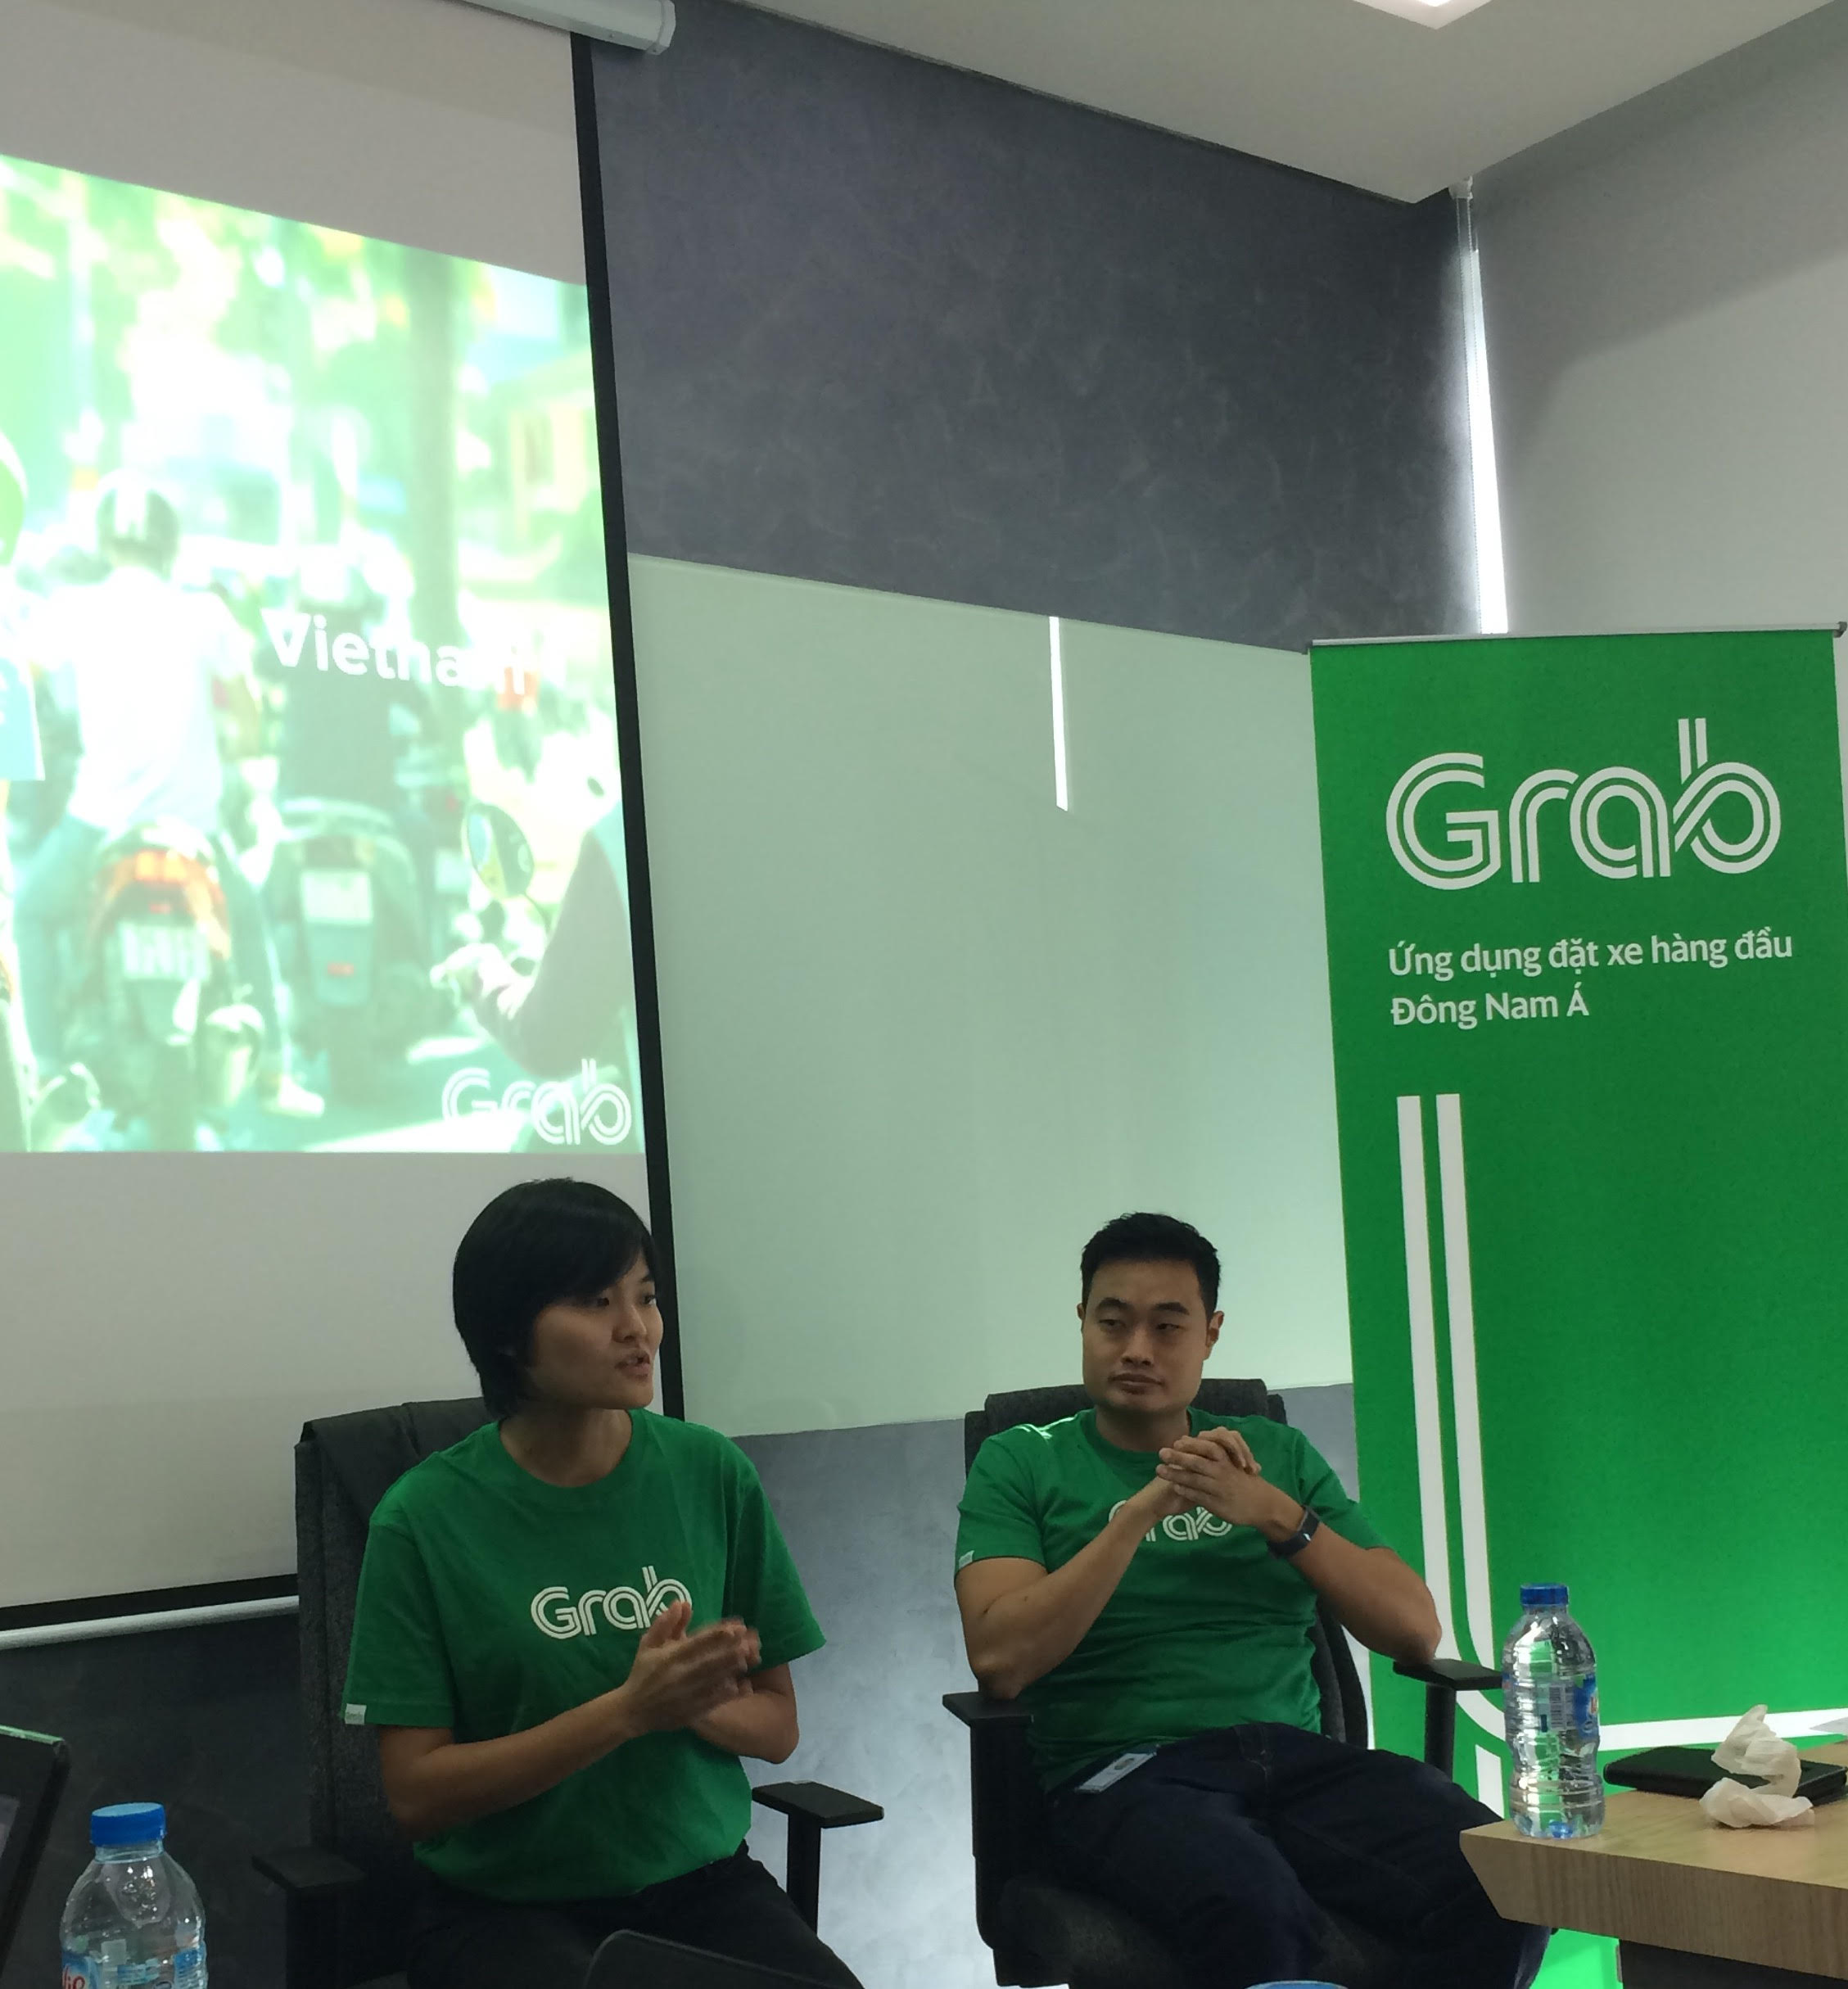 Grab expands its offerings in Vietnam